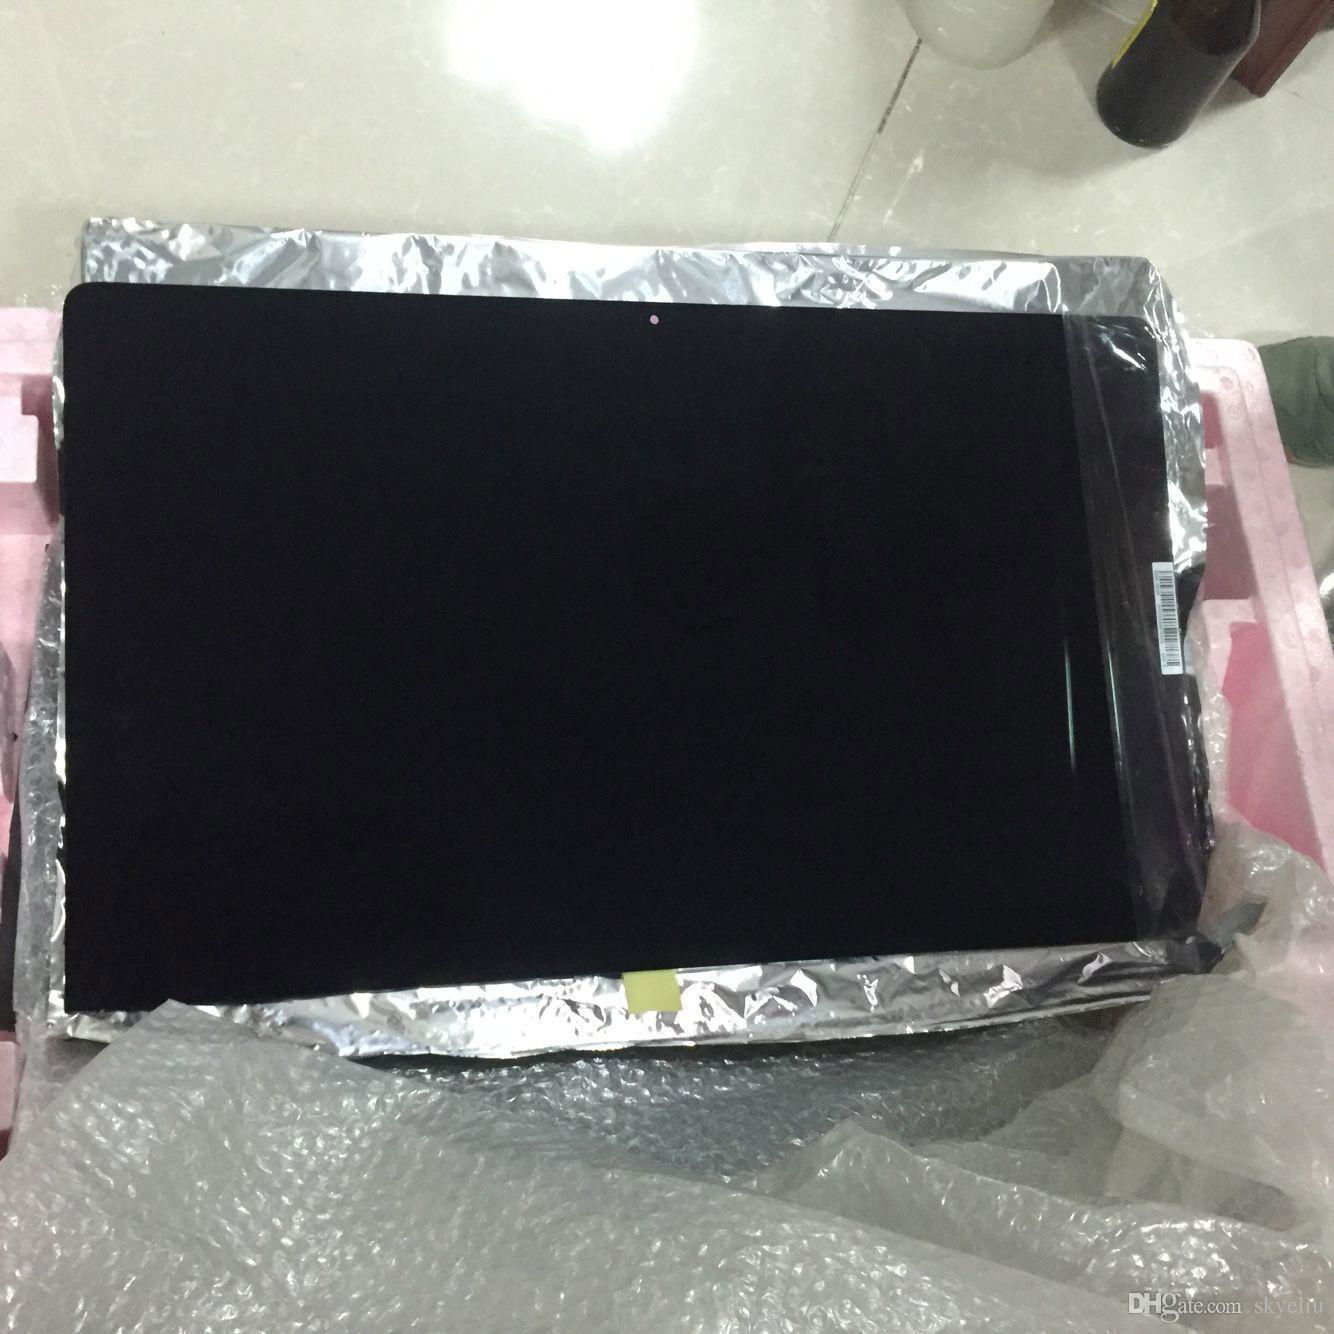 Provide LM270WQ1(SD)(F2) 2K LCD + Glass Brand new A Grade screen for apple imac 